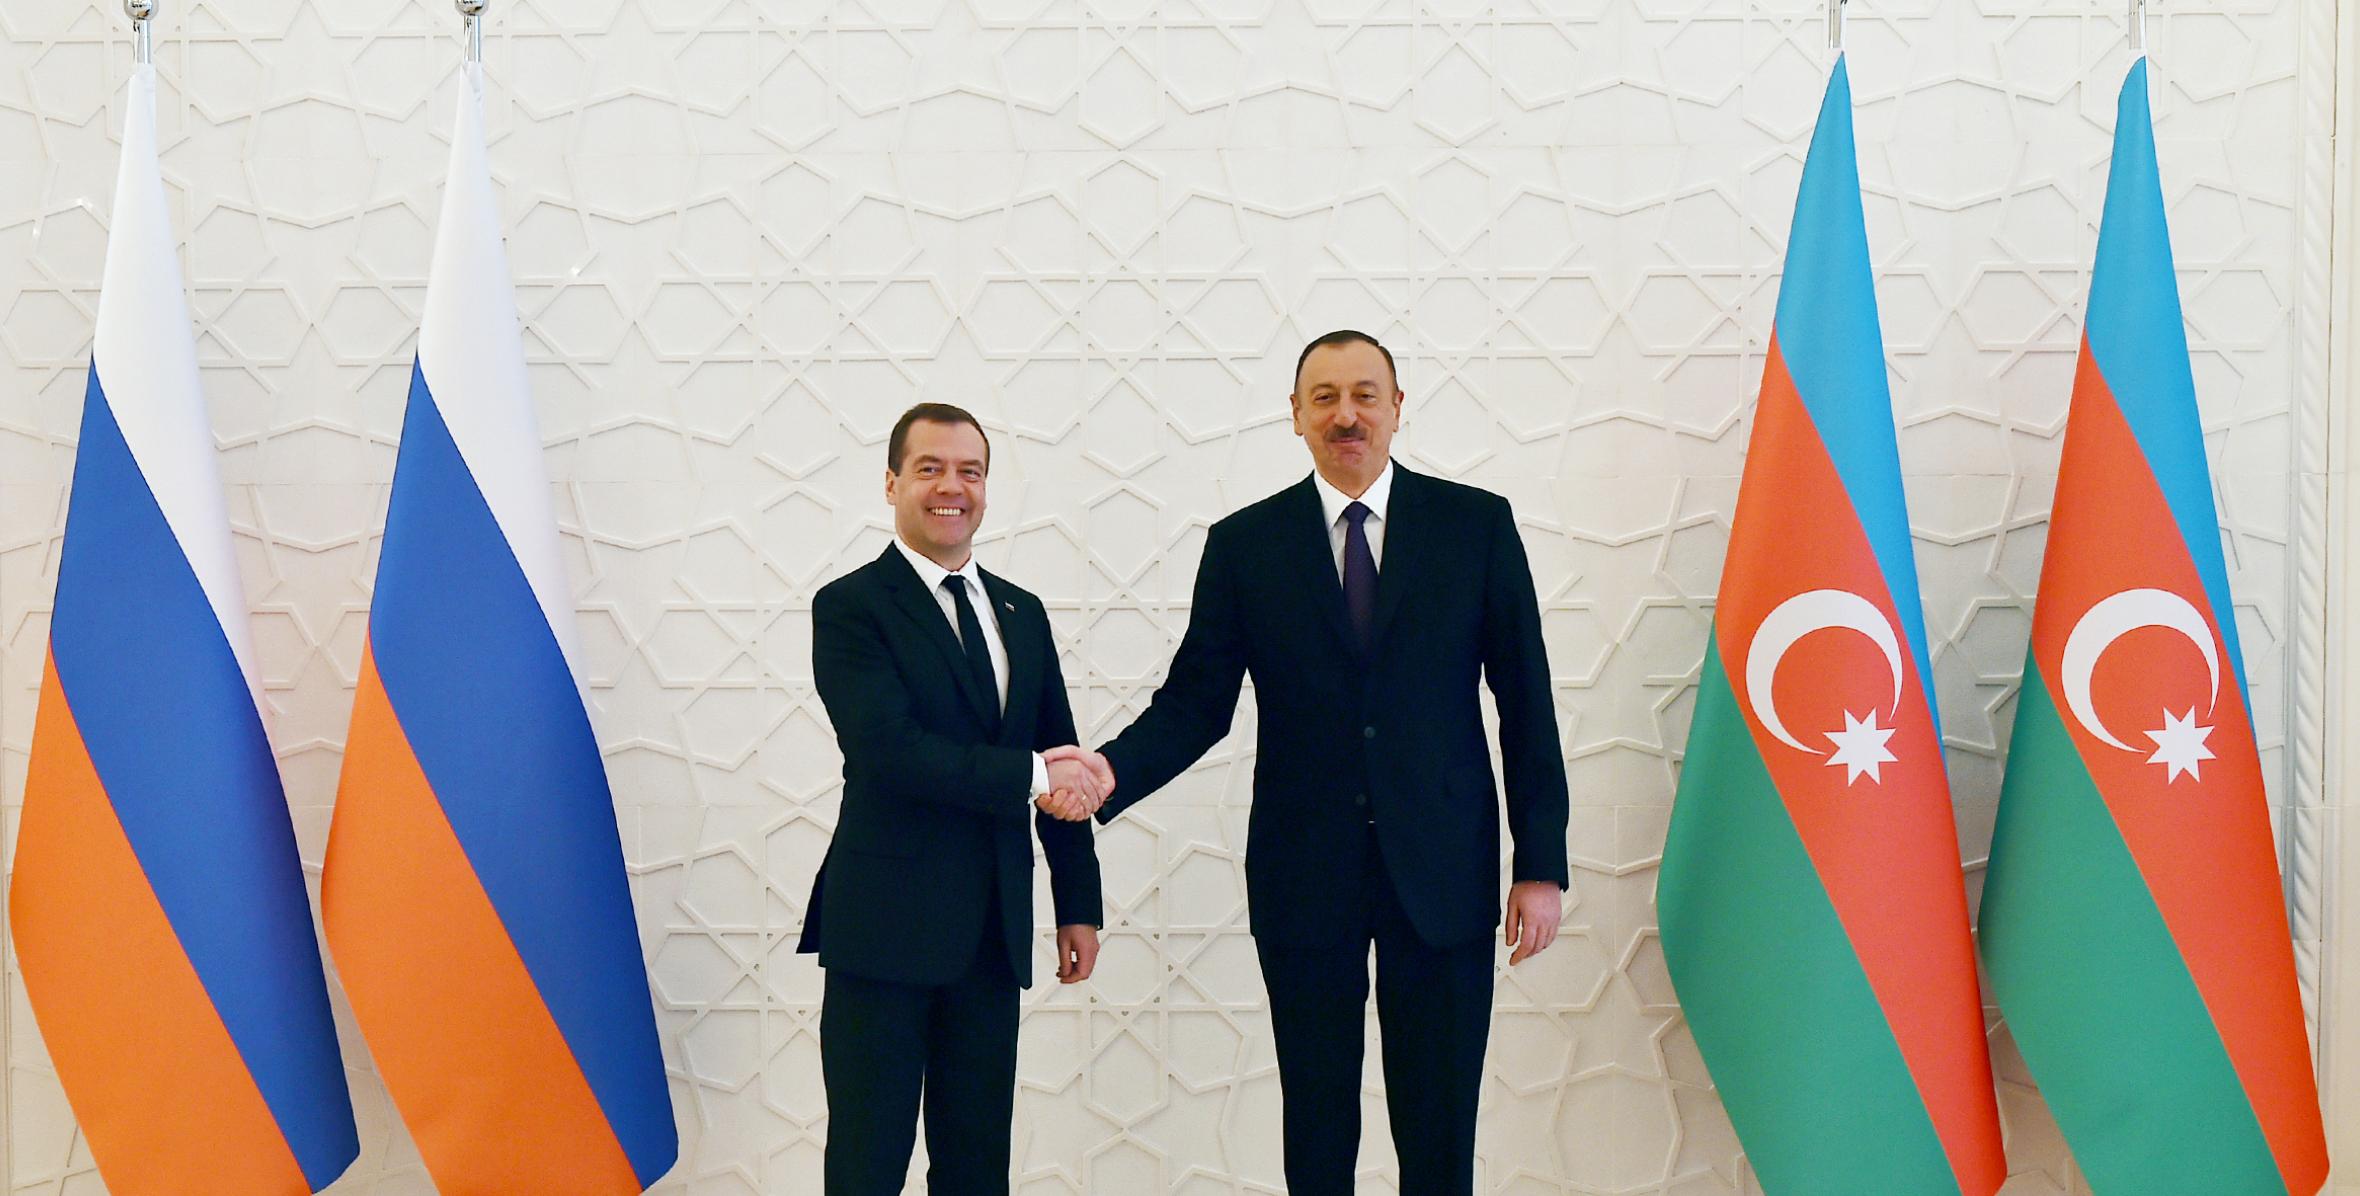 Ilham Aliyev and Chairman of the Russian government Dmitry Medvedev met in a limited format